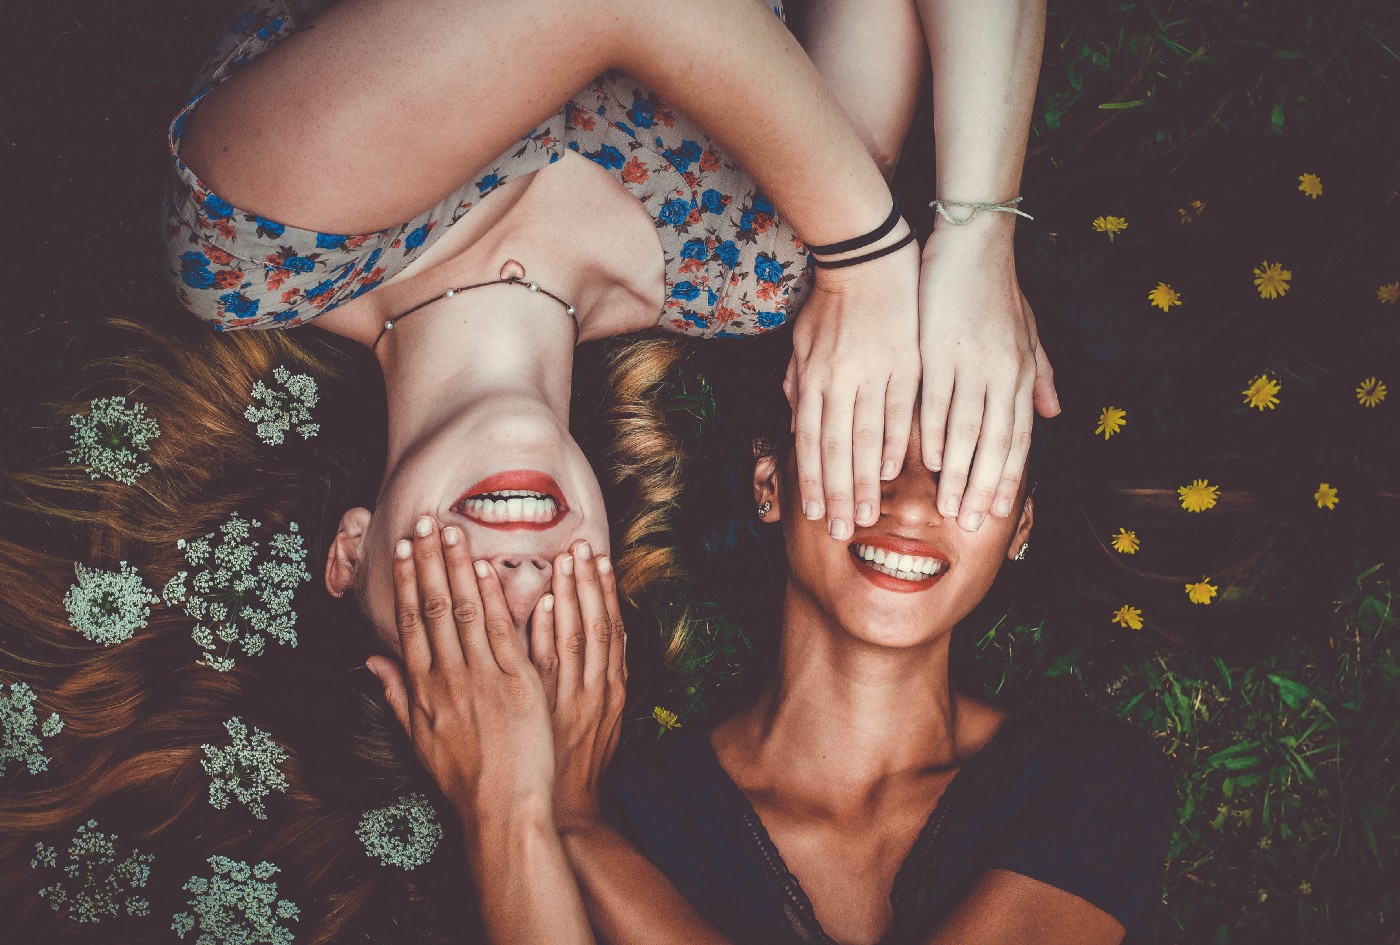 Two girls covering each other's eyes.